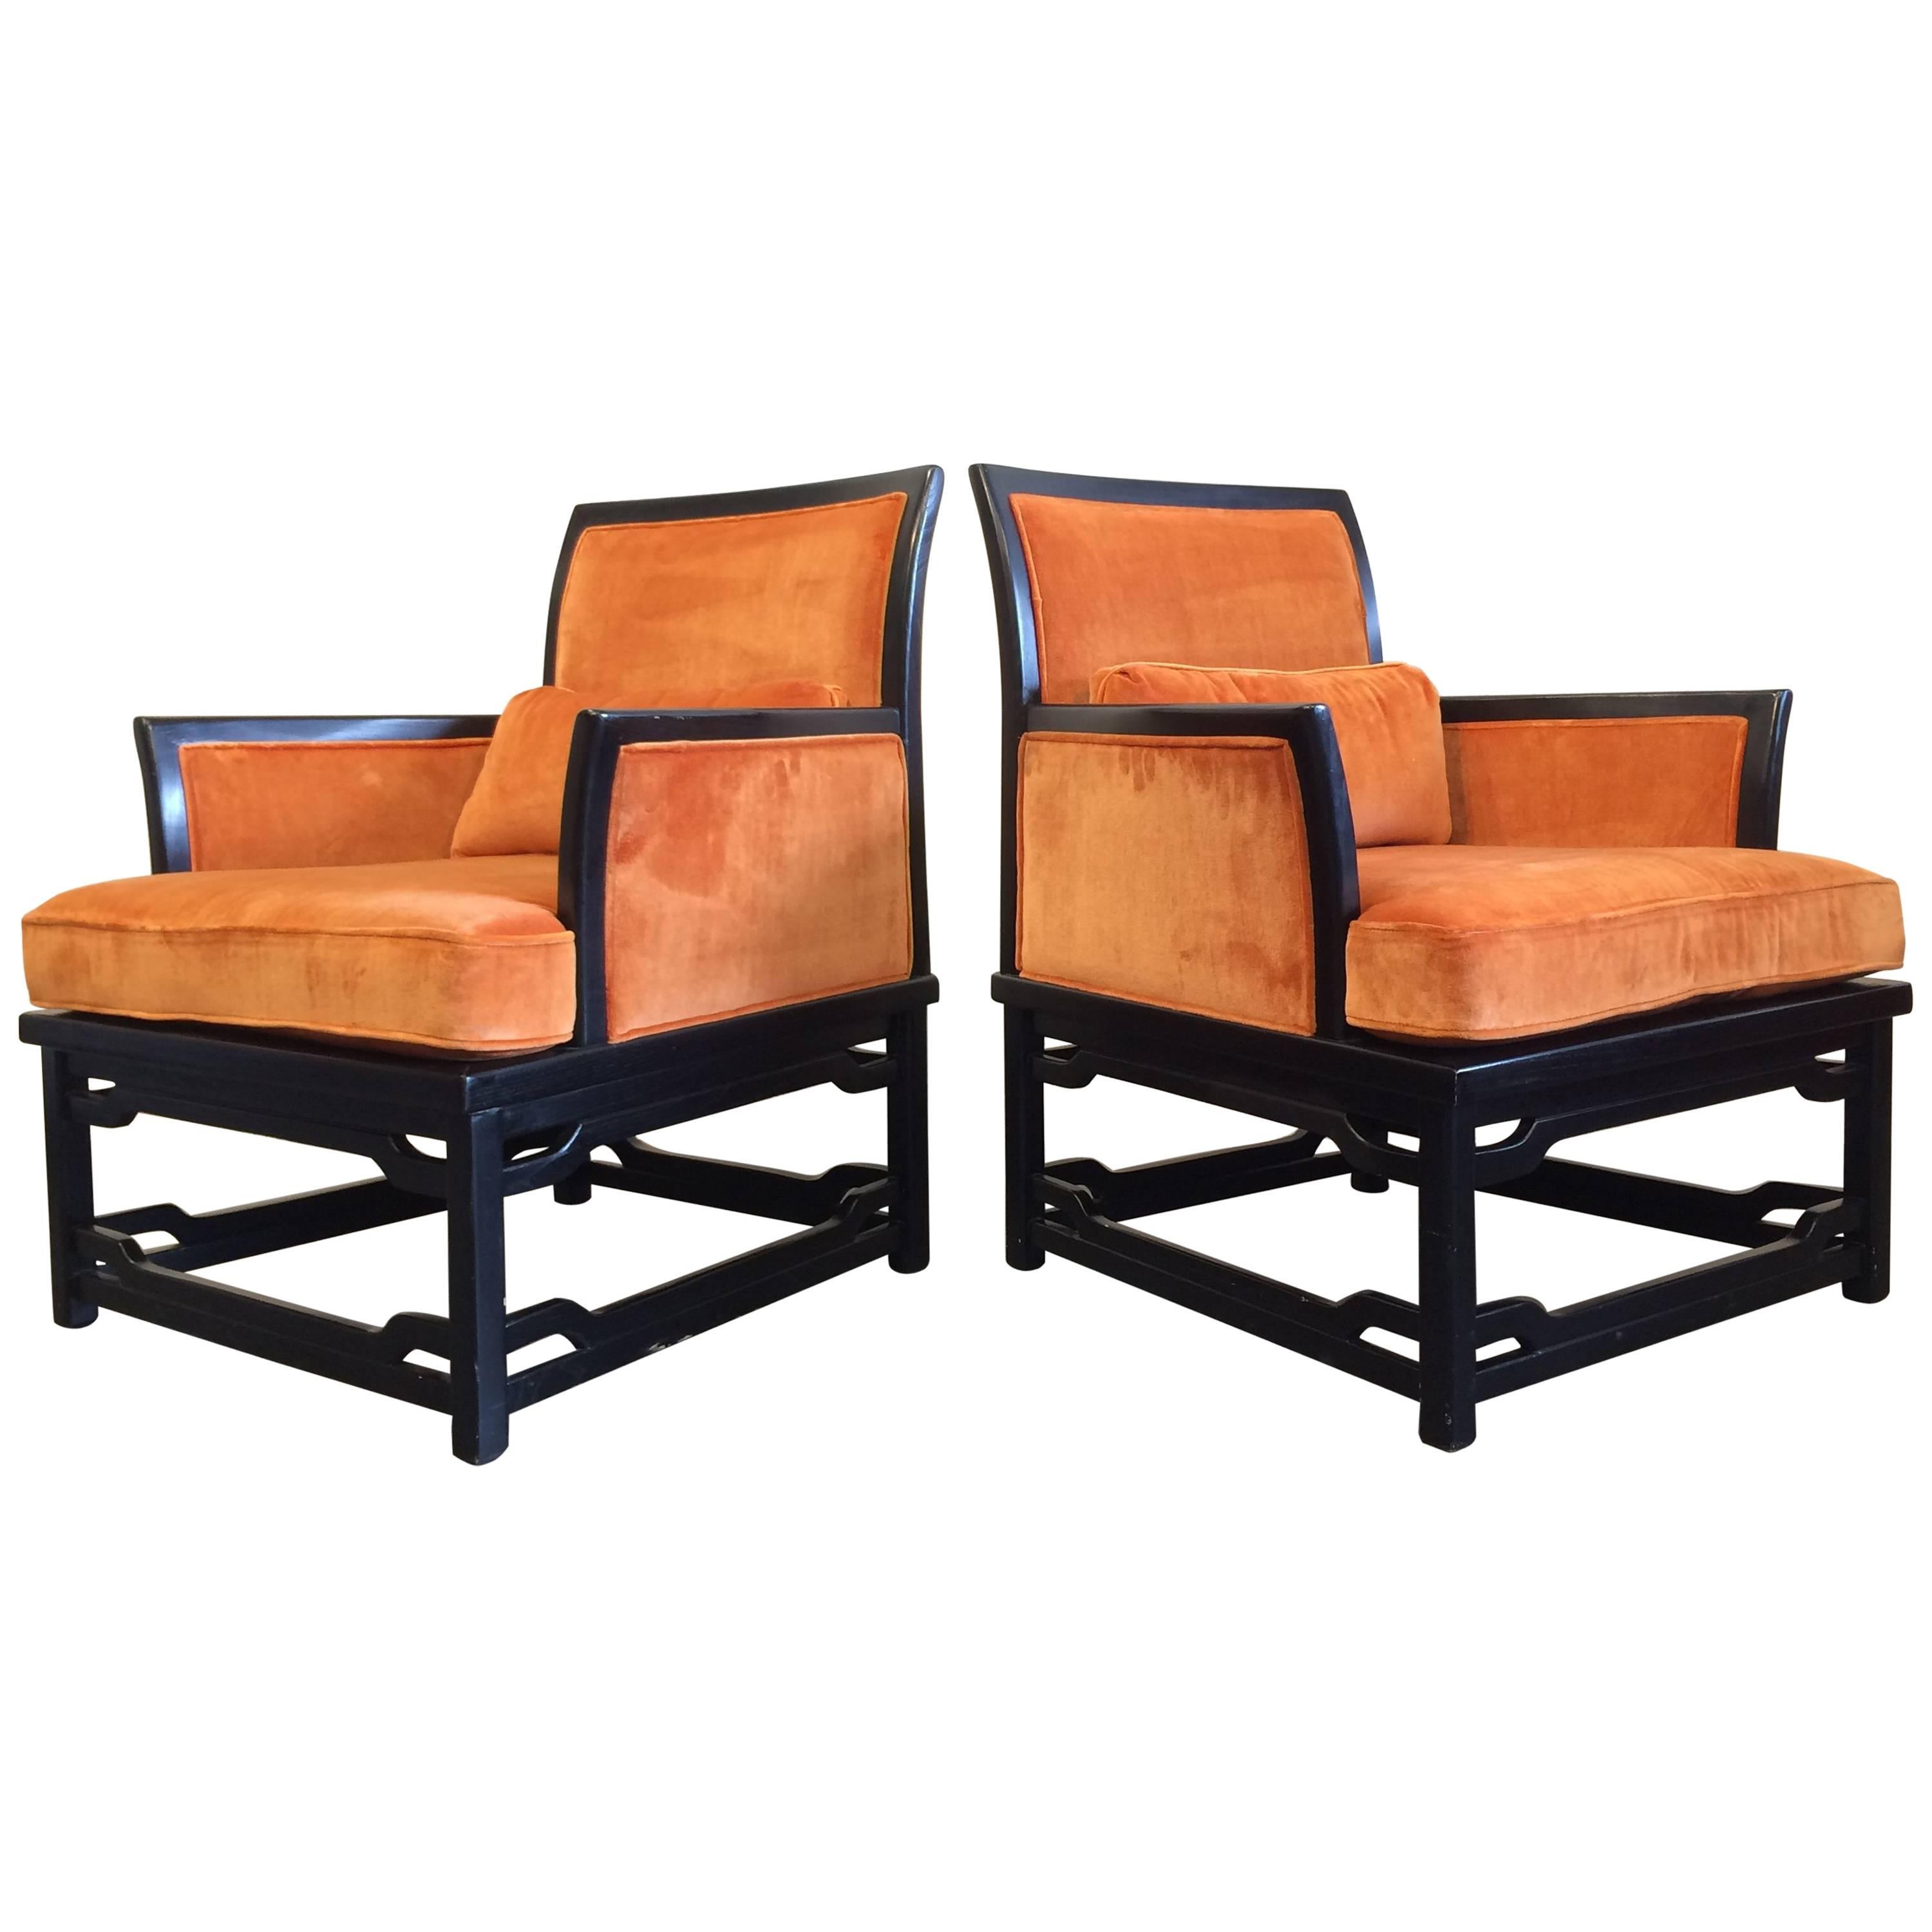 Pair of Lounge Chairs, James Mont Style